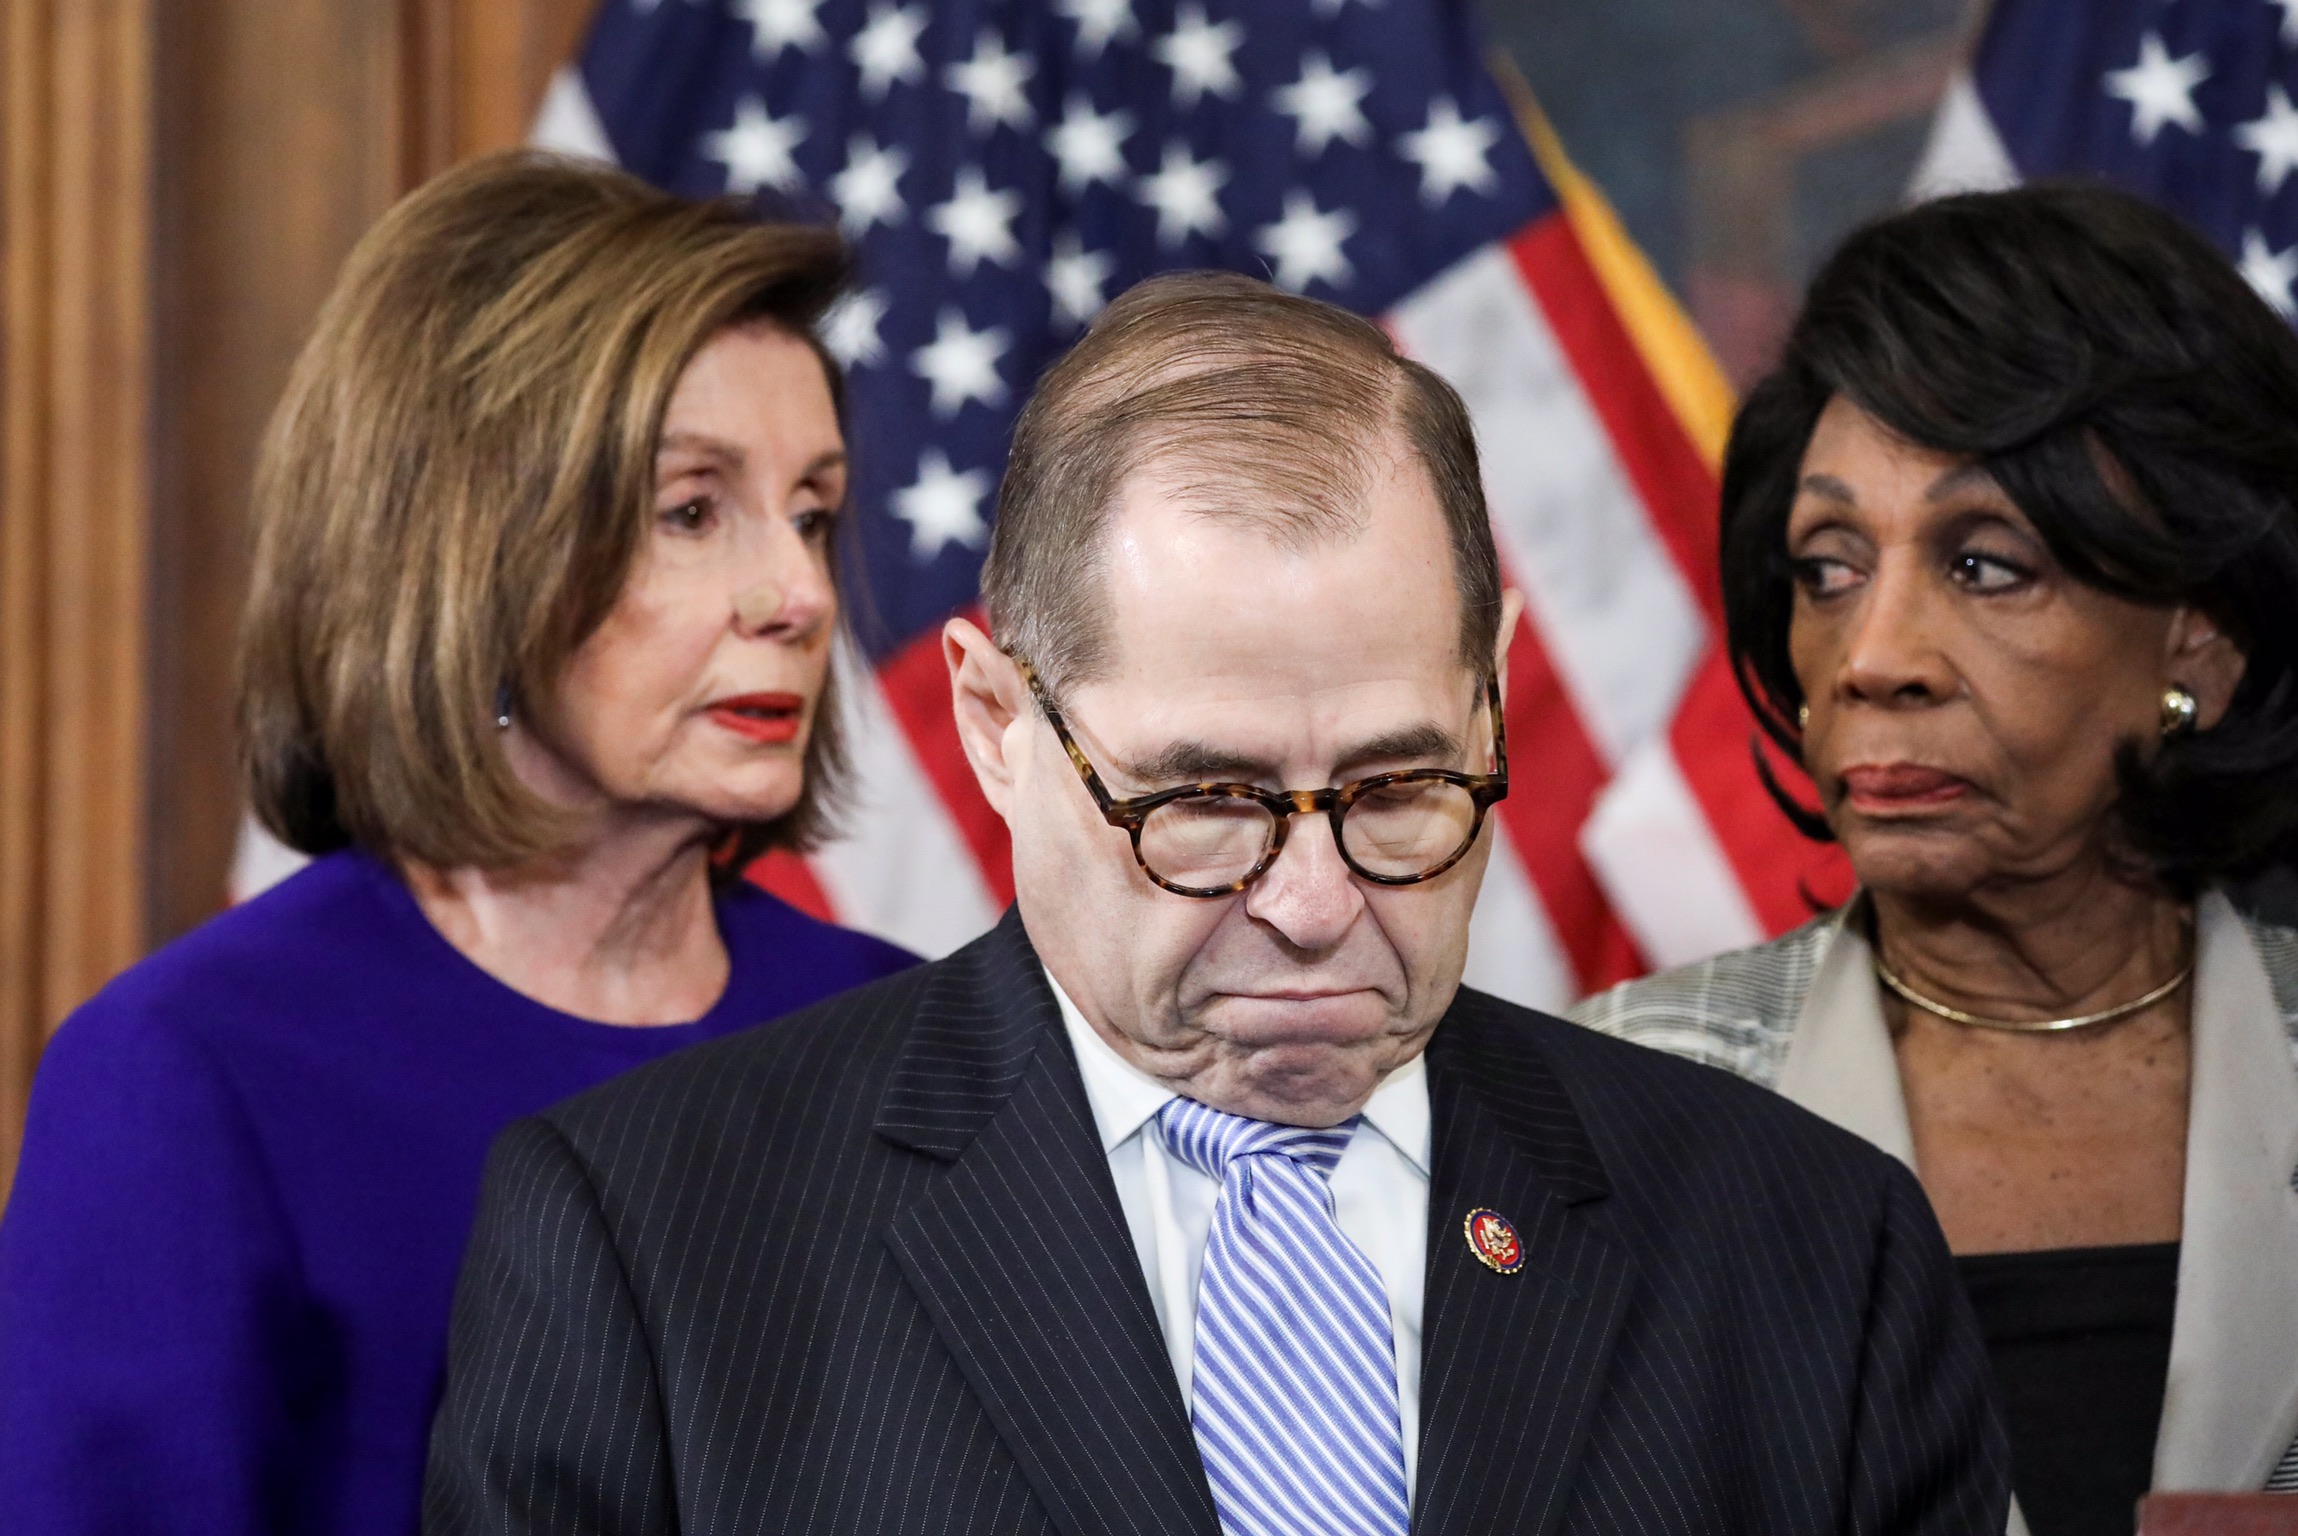 House Judiciary Chairman Jerrold Nadler (D-NY) stands with U.S. House Speaker Nancy Pelosi (D-CA), House Financial Services Chairwoman Maxine Waters (D-CA) and other House committee chairs at a news conference to announce articles of impeachment against U.S. President Donald Trump on Capitol Hill in Washington, U.S., Dec. 10, 2019. REUTERS/Jonathan Ernst